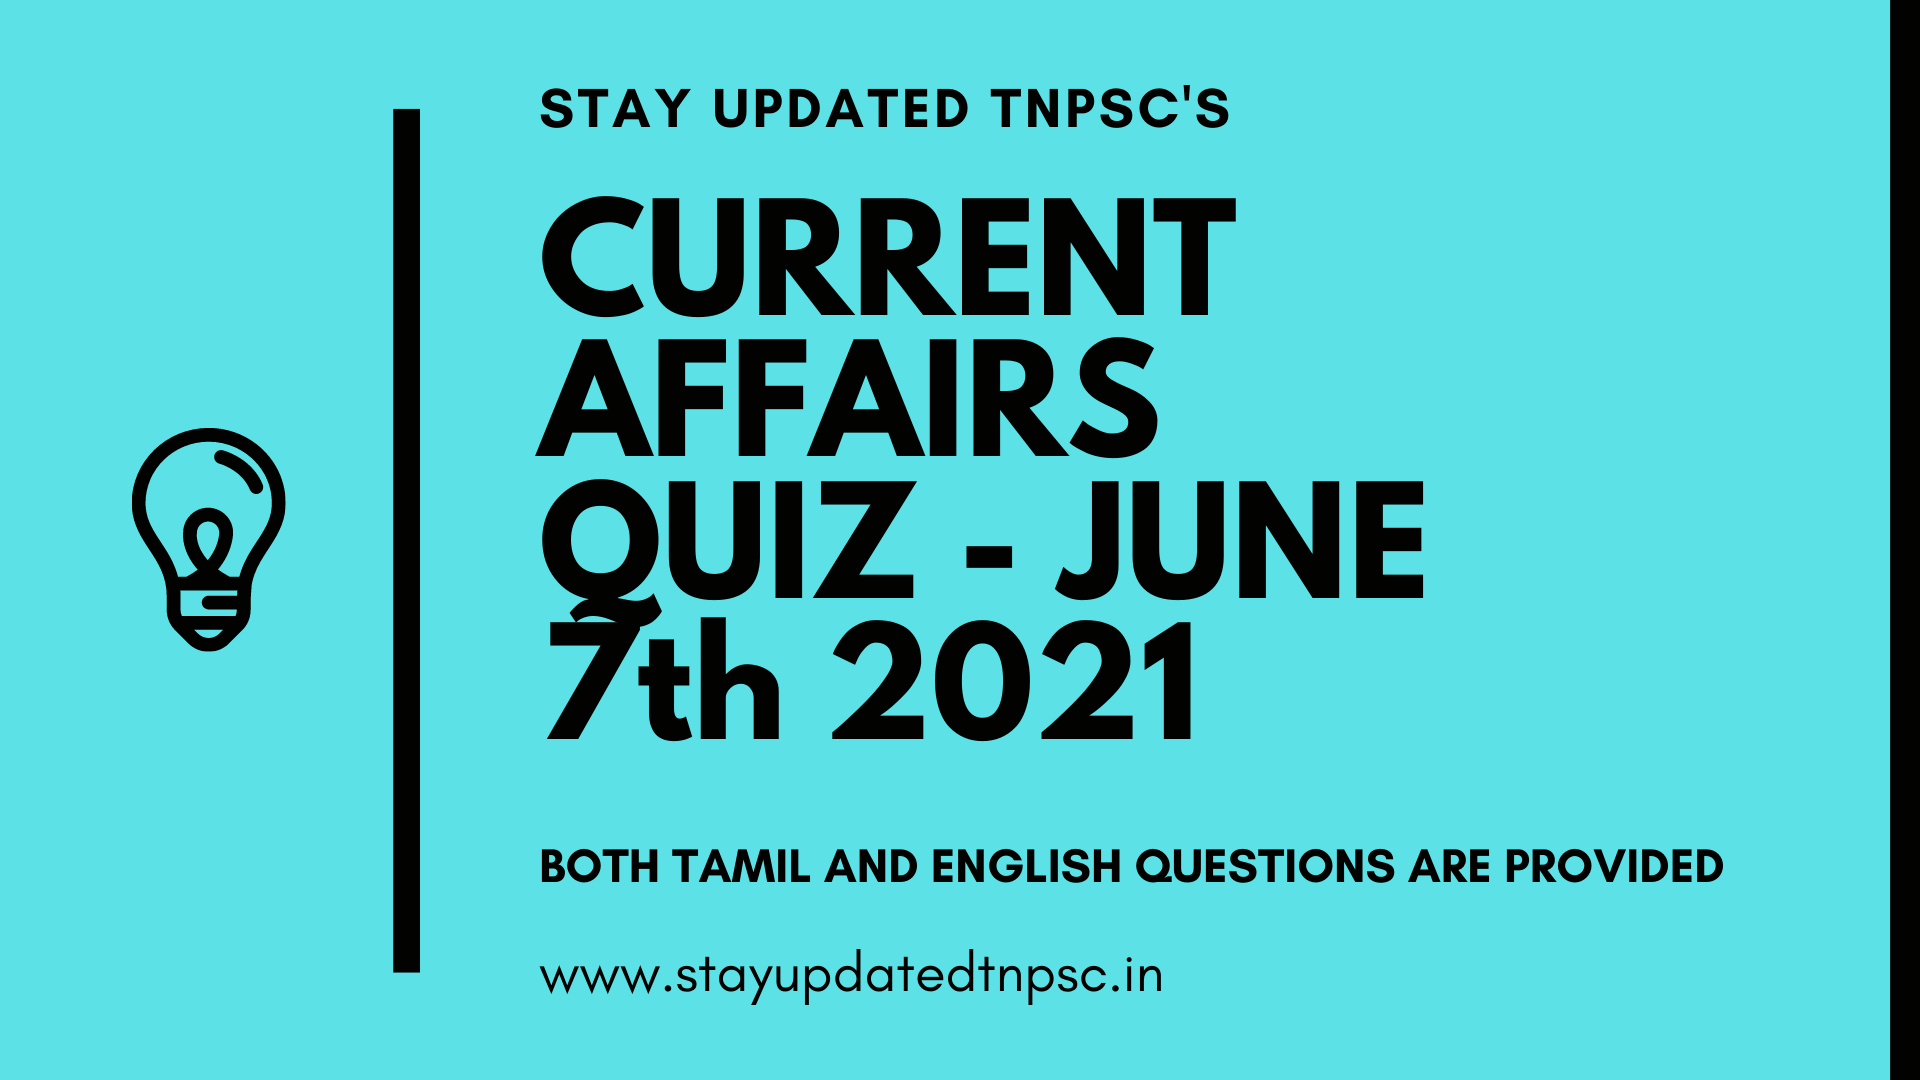 TNPSC DAILY CURRENT AFFAIRS: 07 JUNE 2021